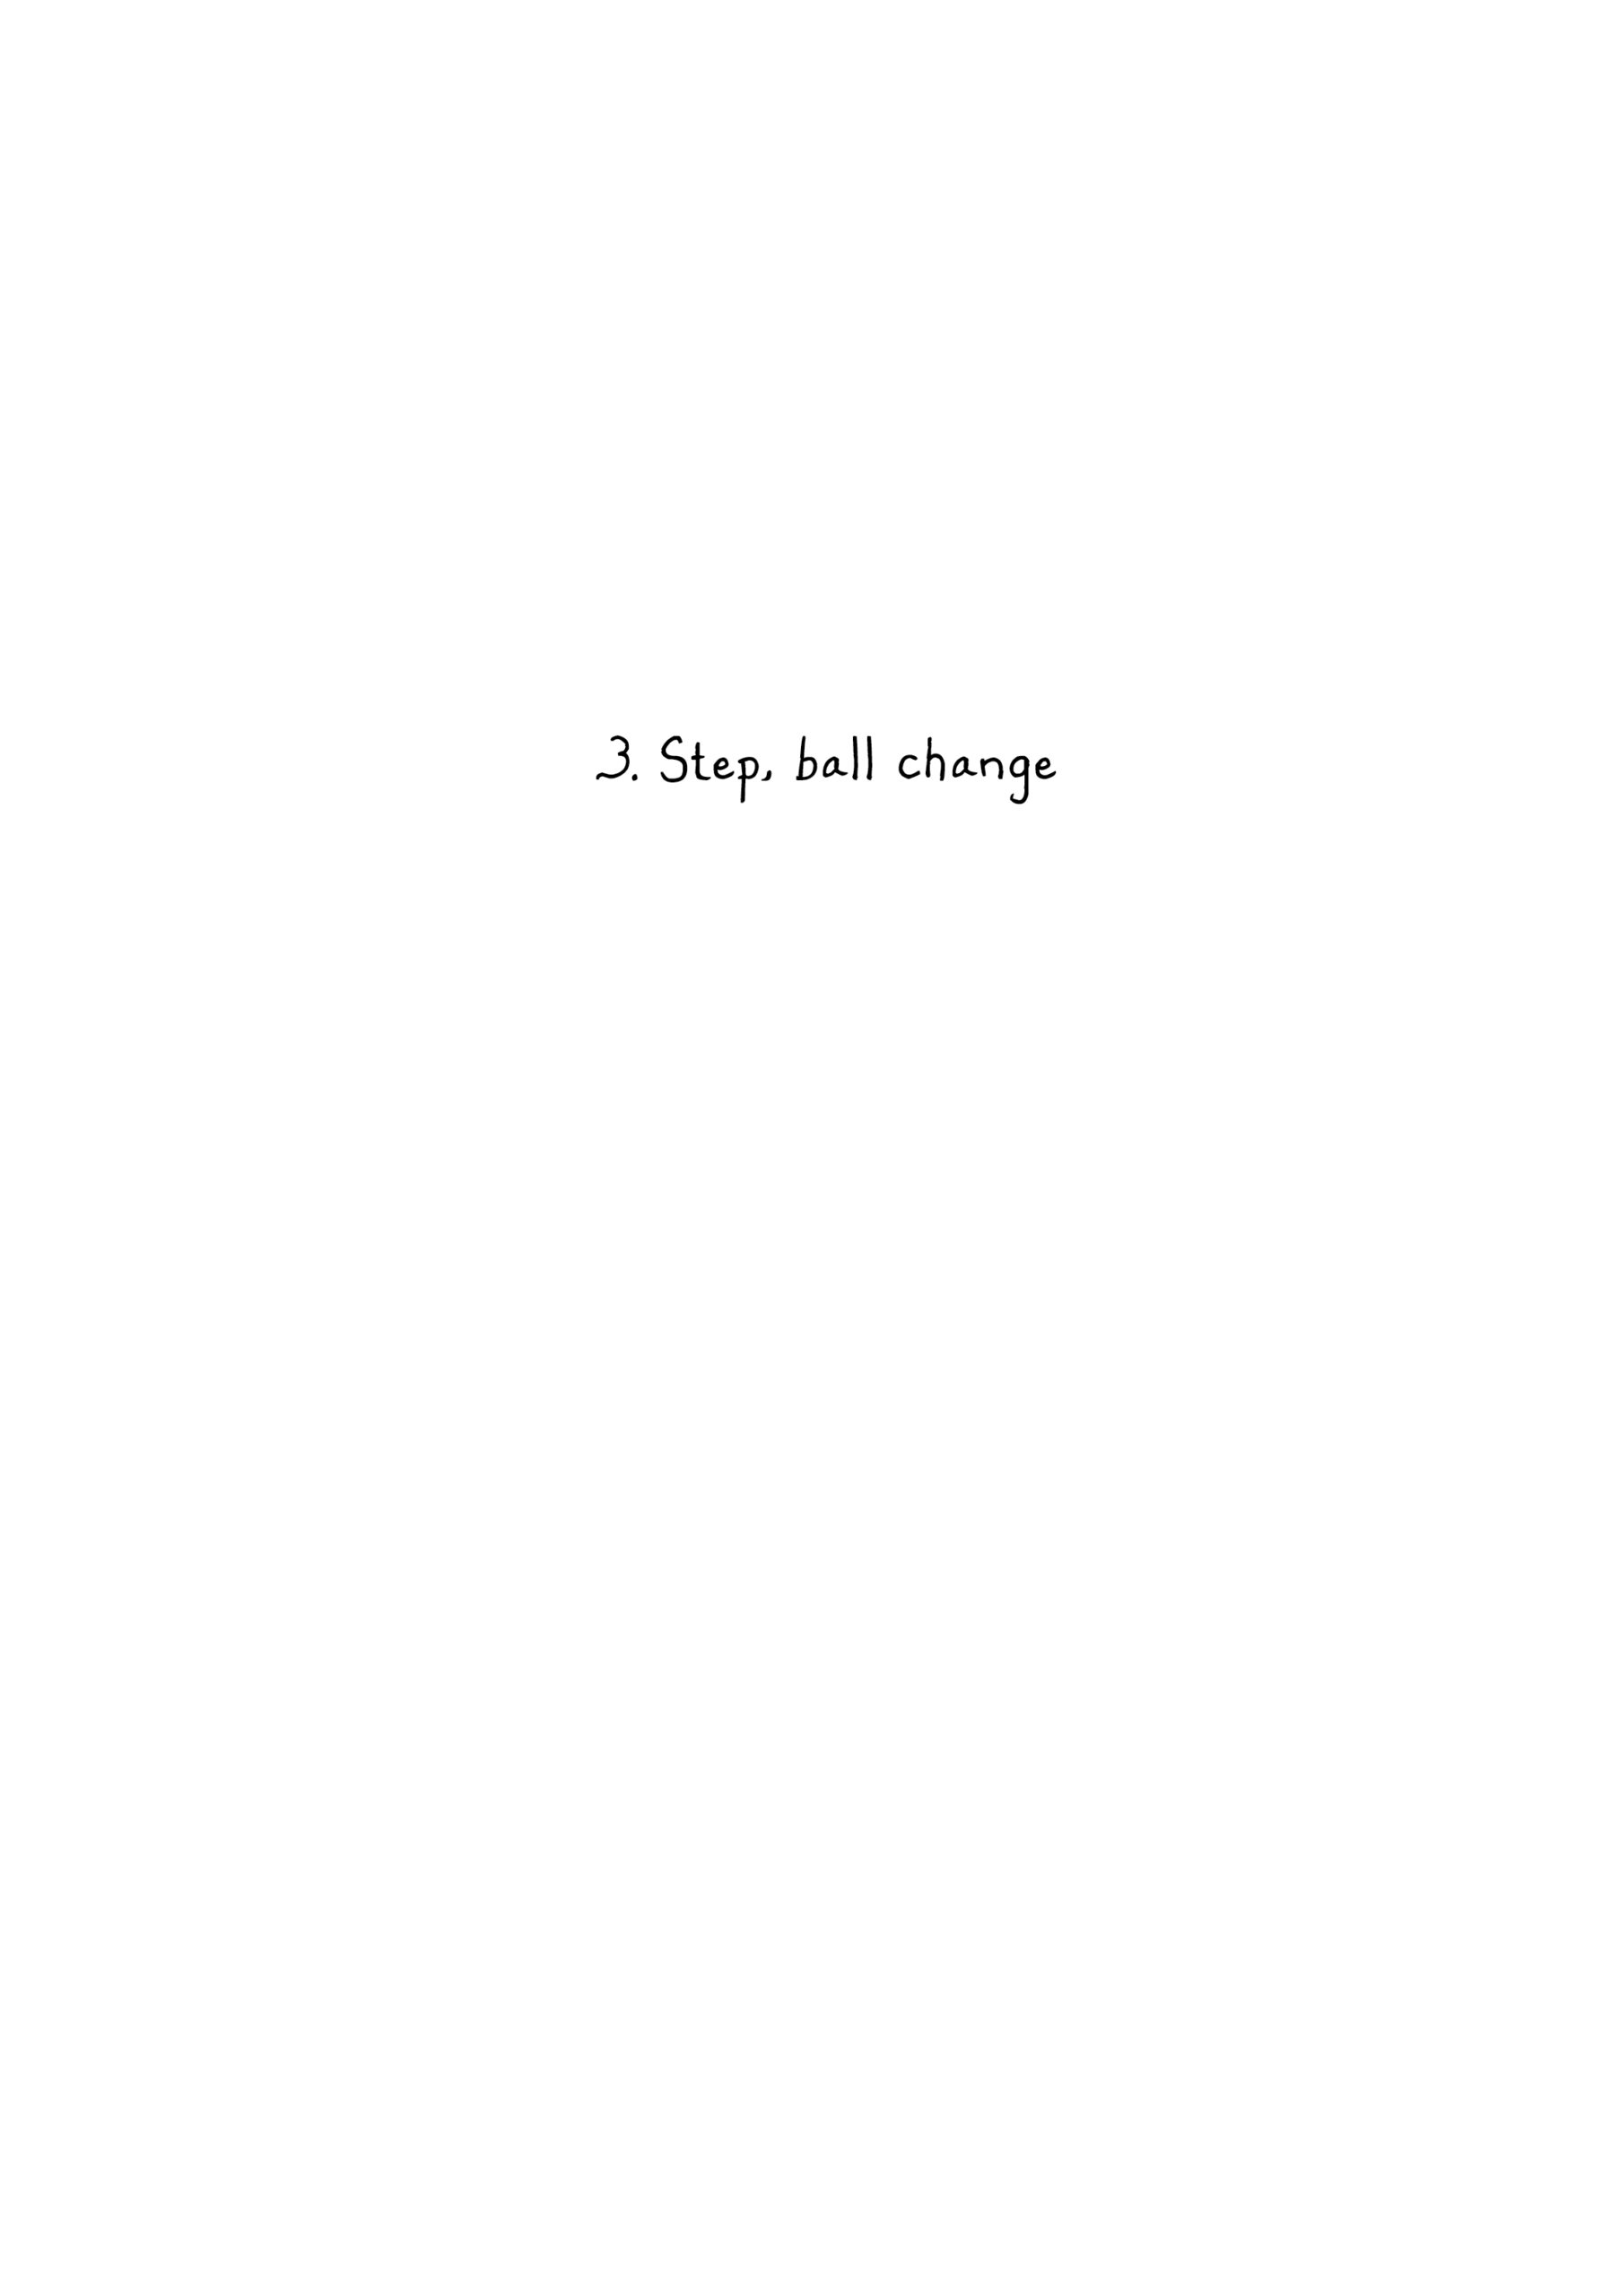 Title page: "3. Step, ball change"